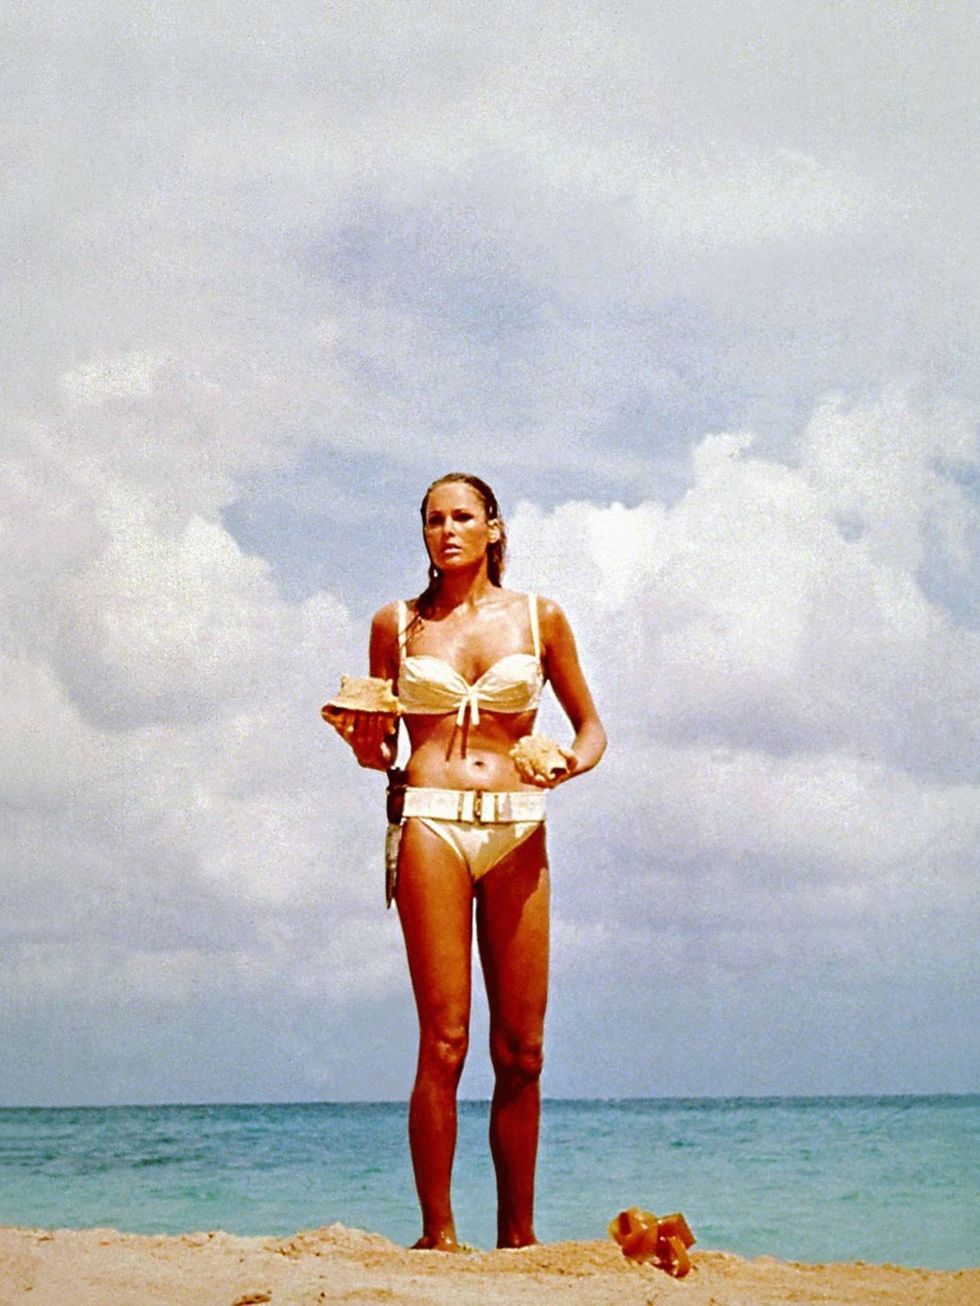 <p>Ursula Andress will forever be the most iconic Bond Girl thanks to her attention grabbing scene in Dr No with her famous white bikini - but who are ELLE's fantasy Bond Girls? Click through the gallery to discover.</p>